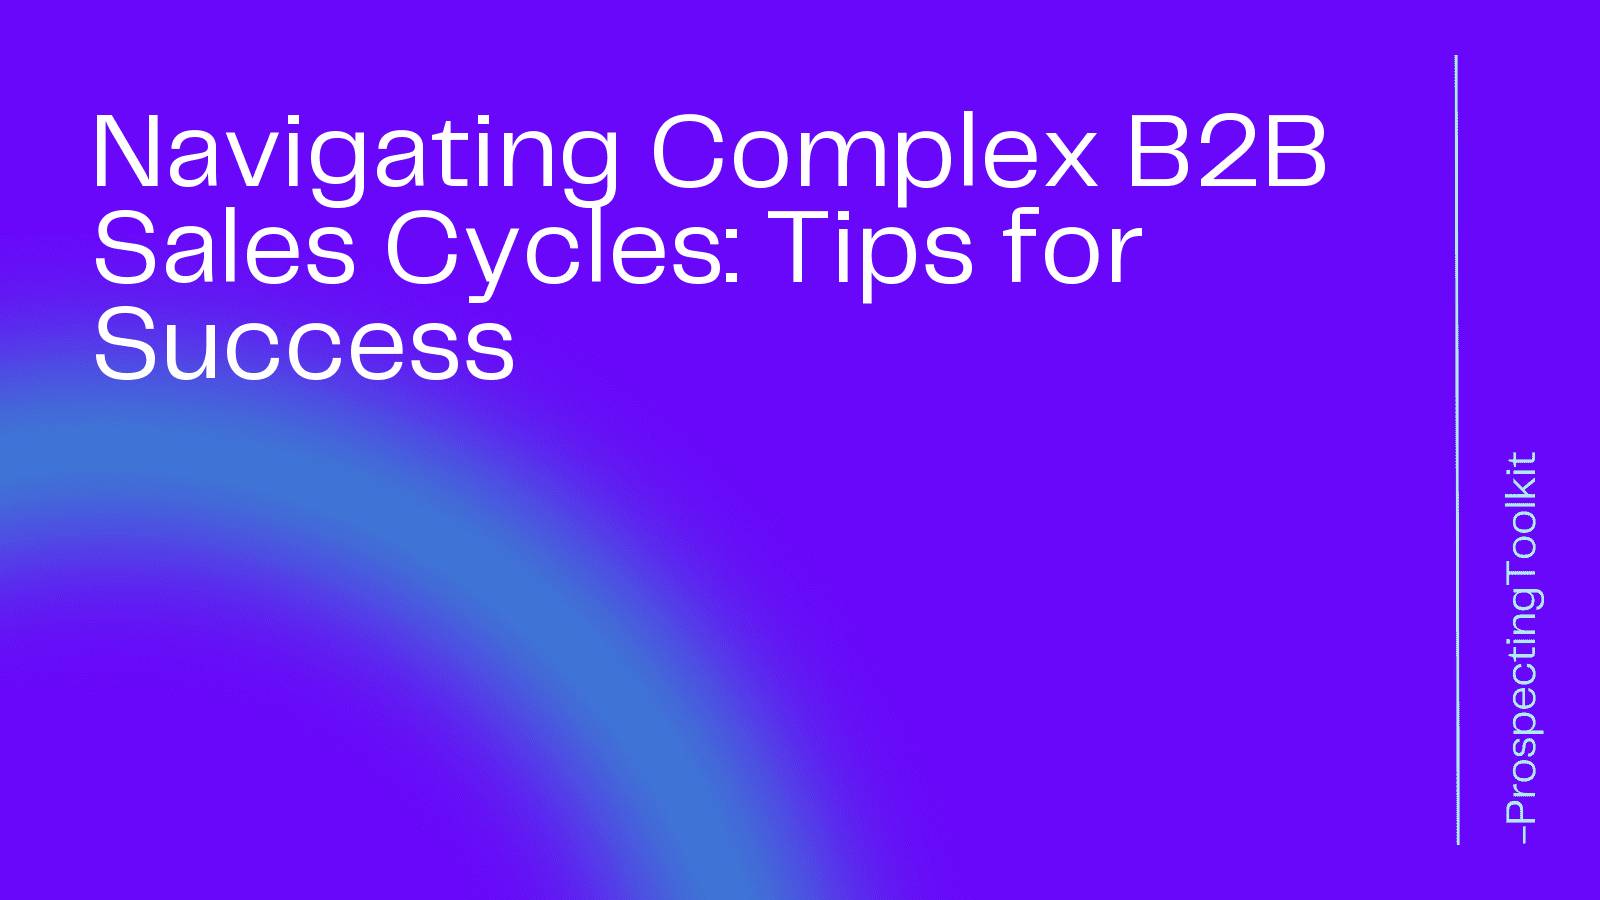 Navigating Complex B2B Sales Cycles: Tips for Success